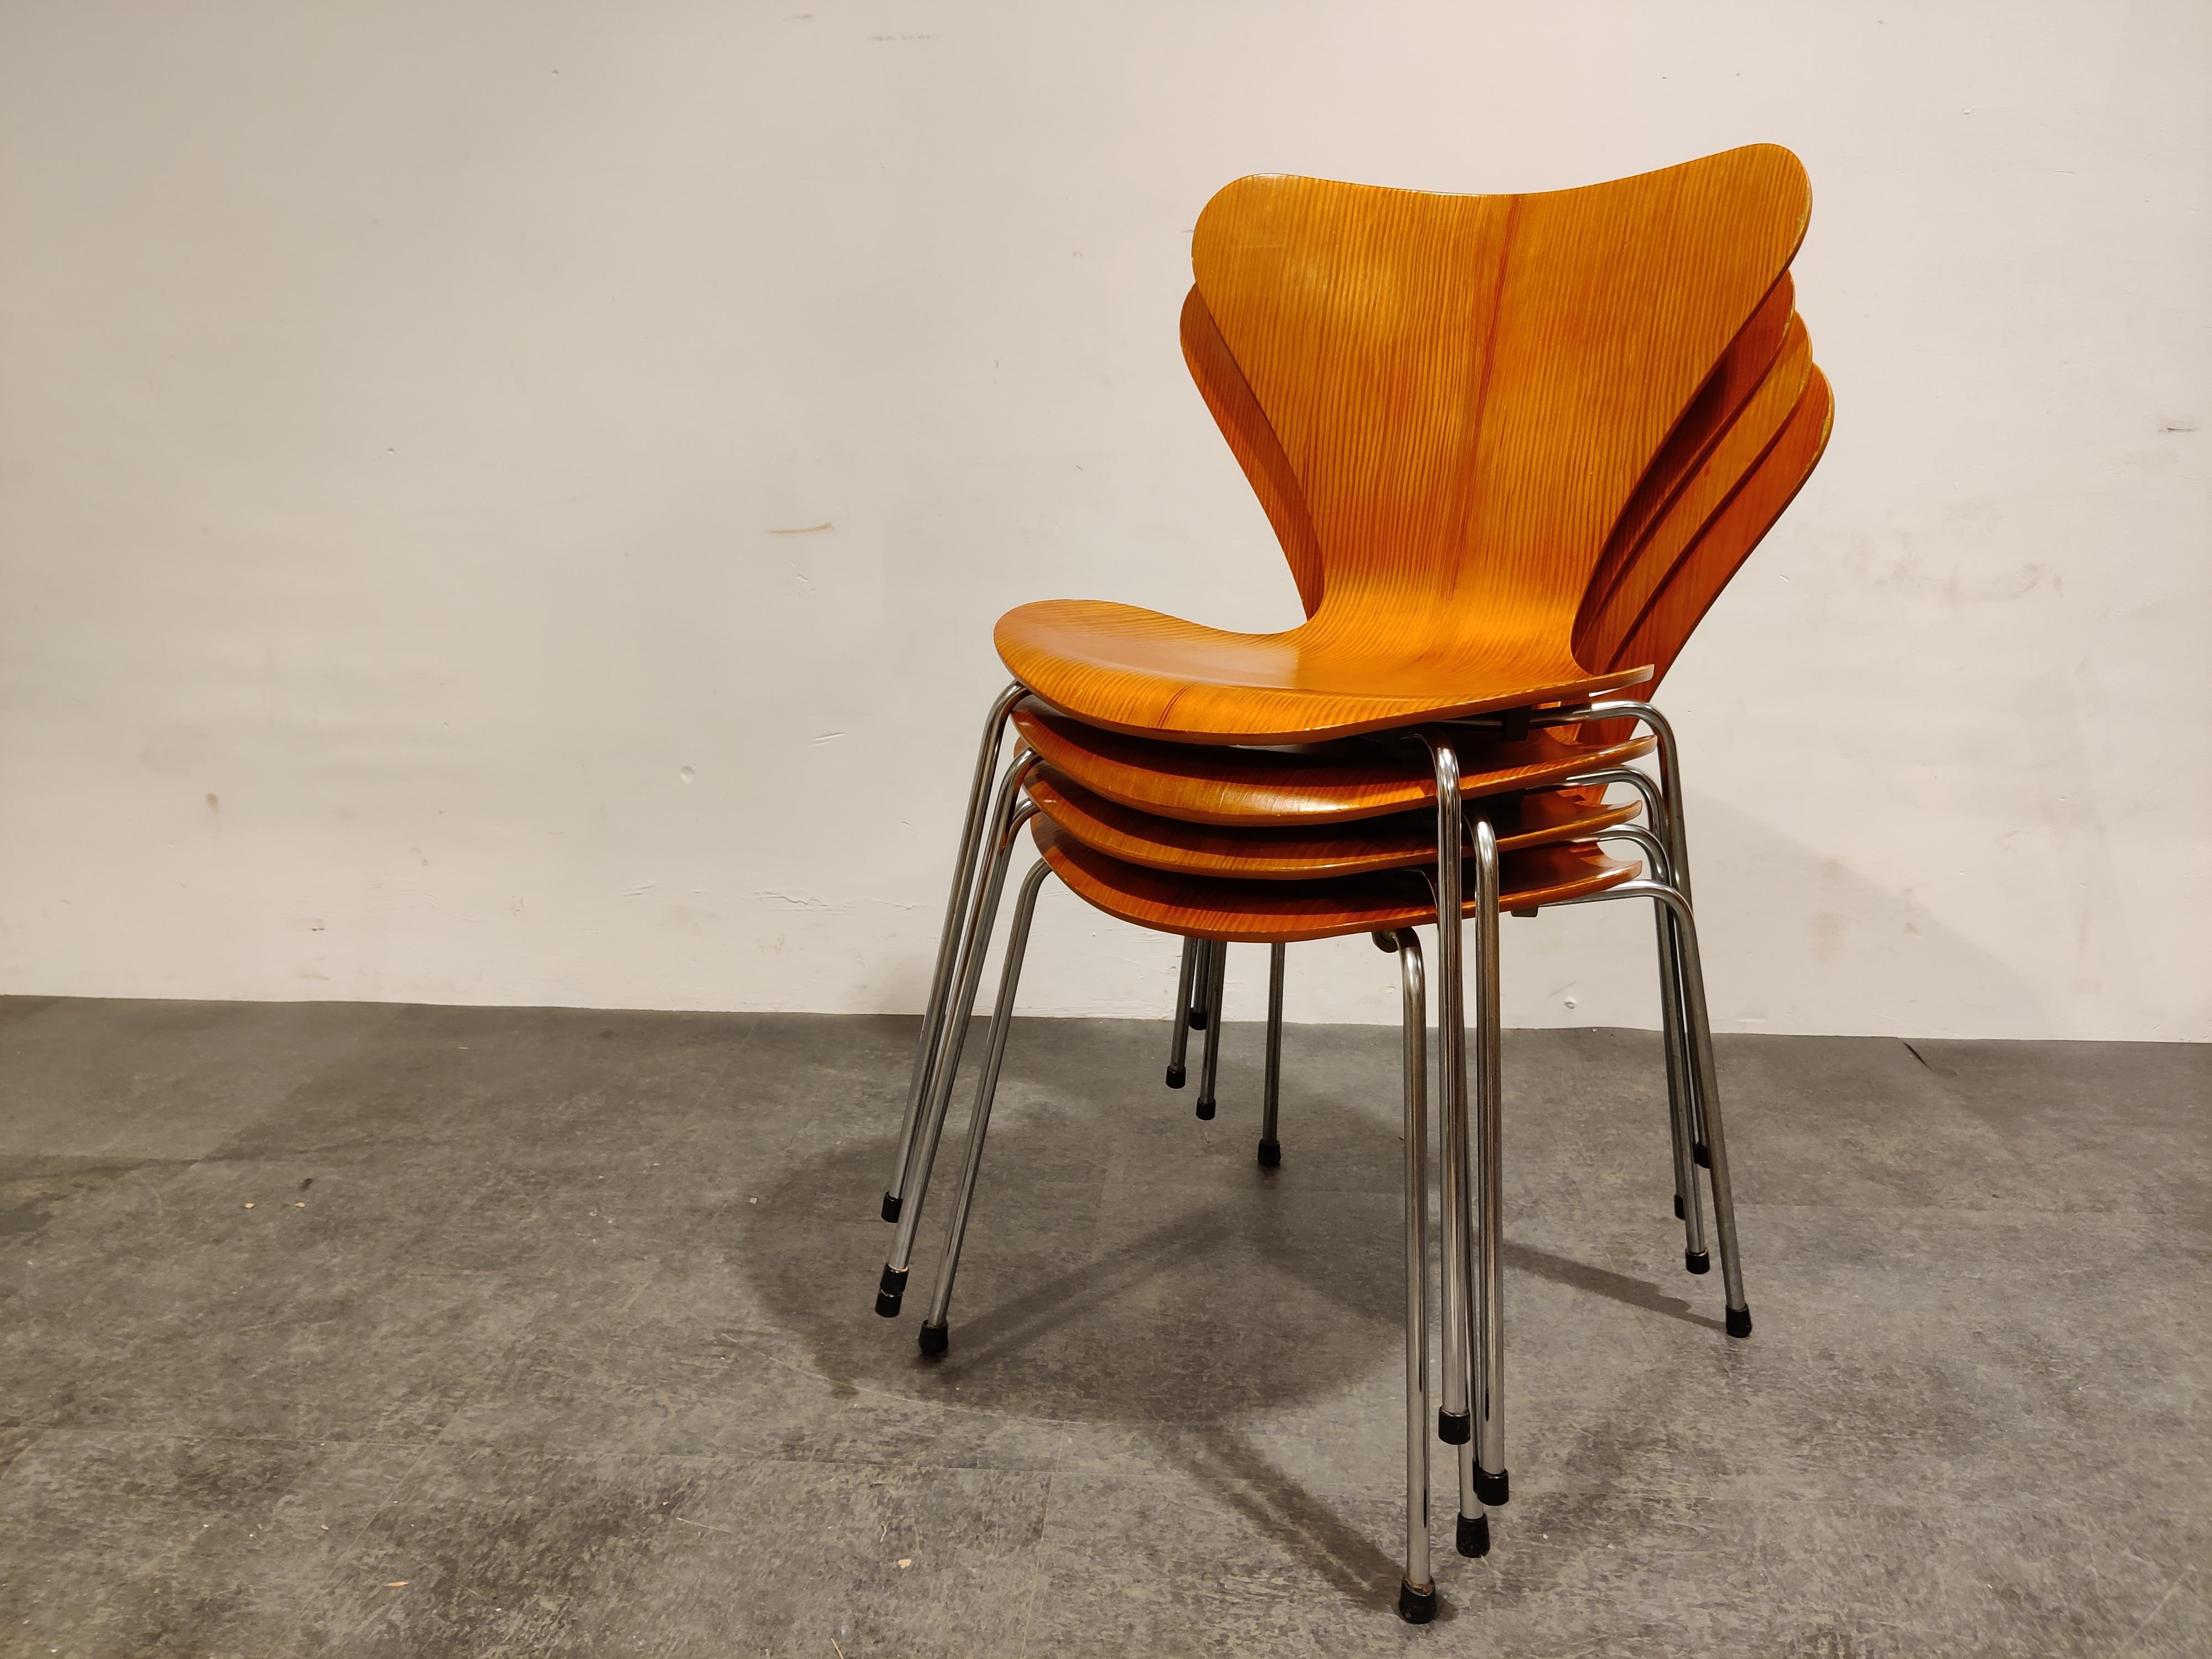 Plywood butterfly chairs model 3107 designed by Arne Jacobsen and produced under license by Fritz Hansen.

These are from the 1980s- 1990s.

Originally designed in the 1950s.

Good condition.

The chairs are stackable.

These chairs have